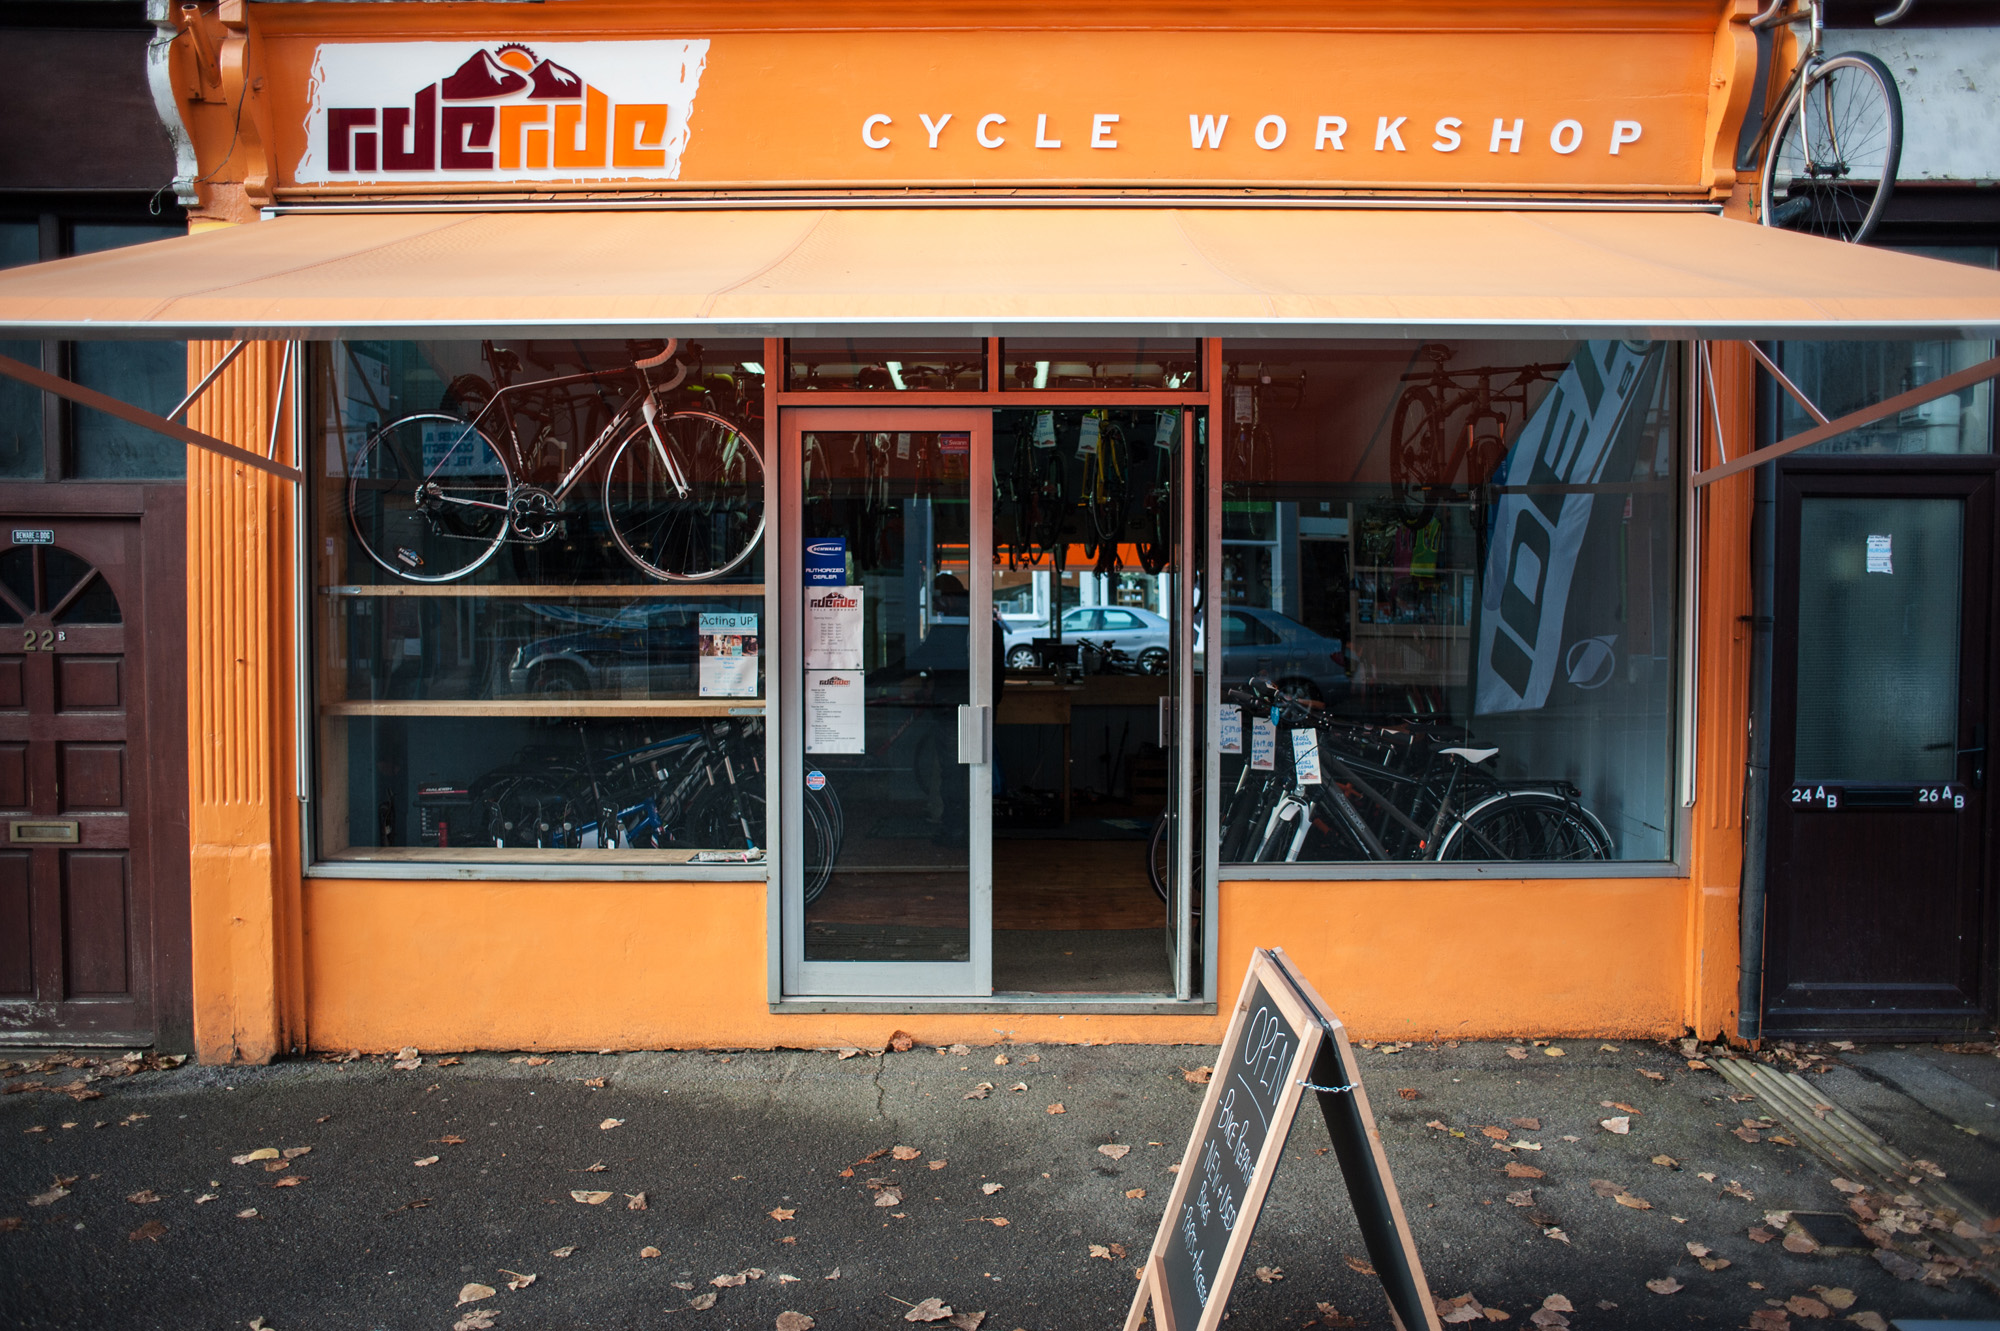 Contact - rideride cycle workshop